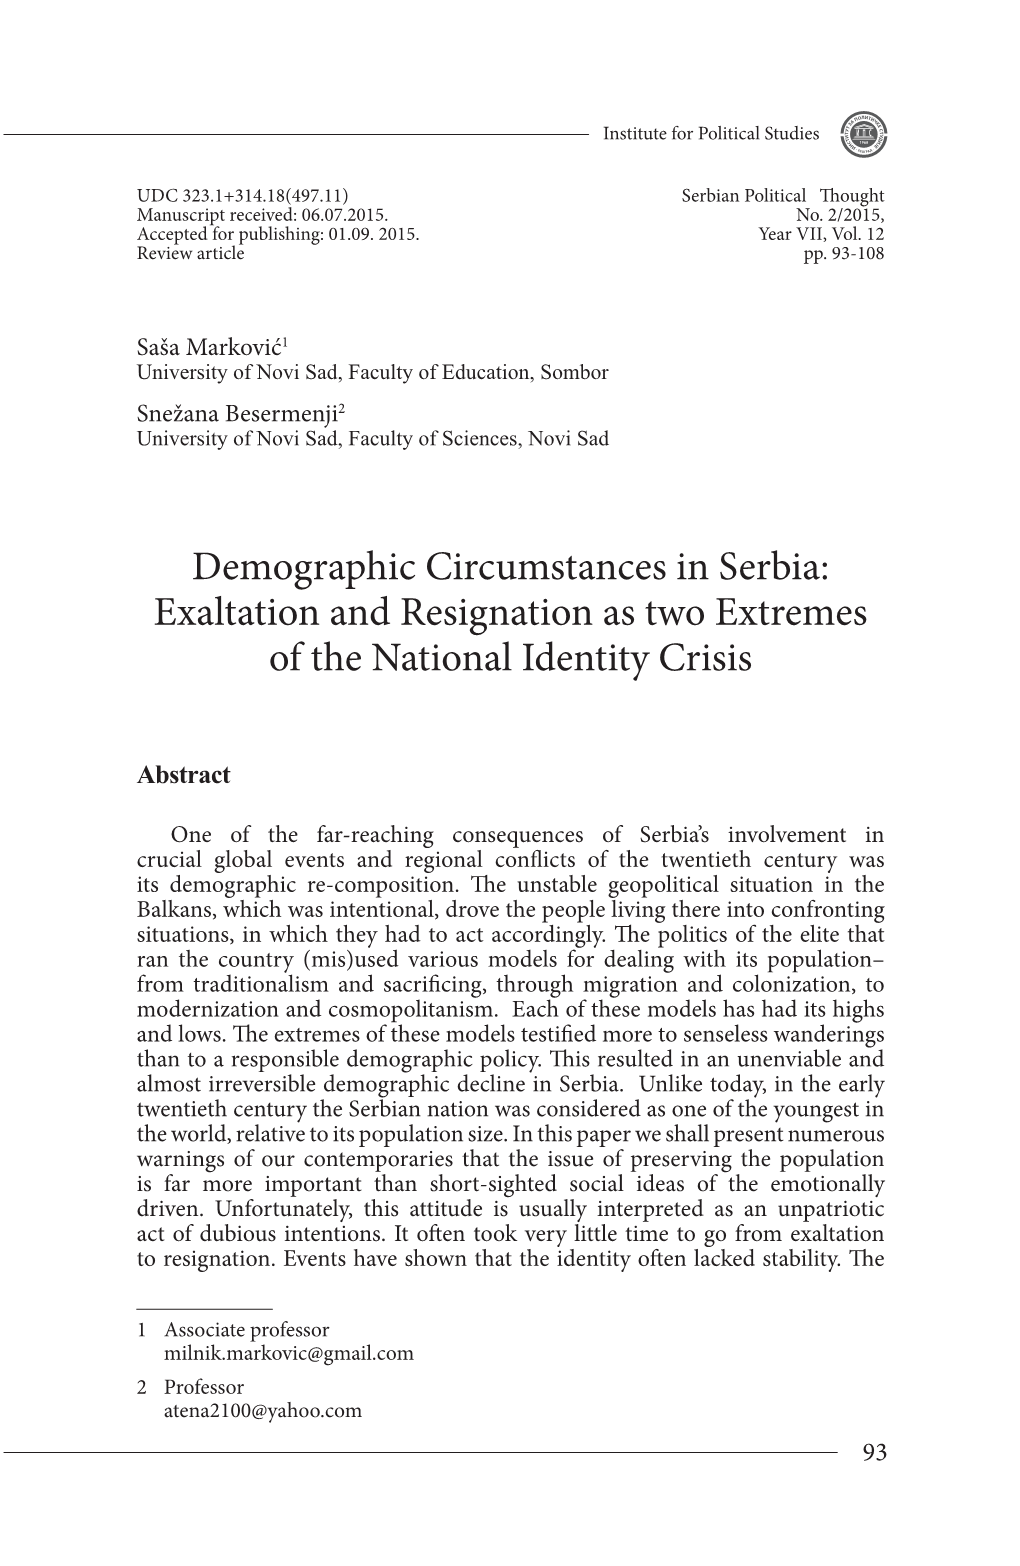 Demographic Circumstances in Serbia: Exaltation and Resignation As Two Extremes of the National Identity Crisis